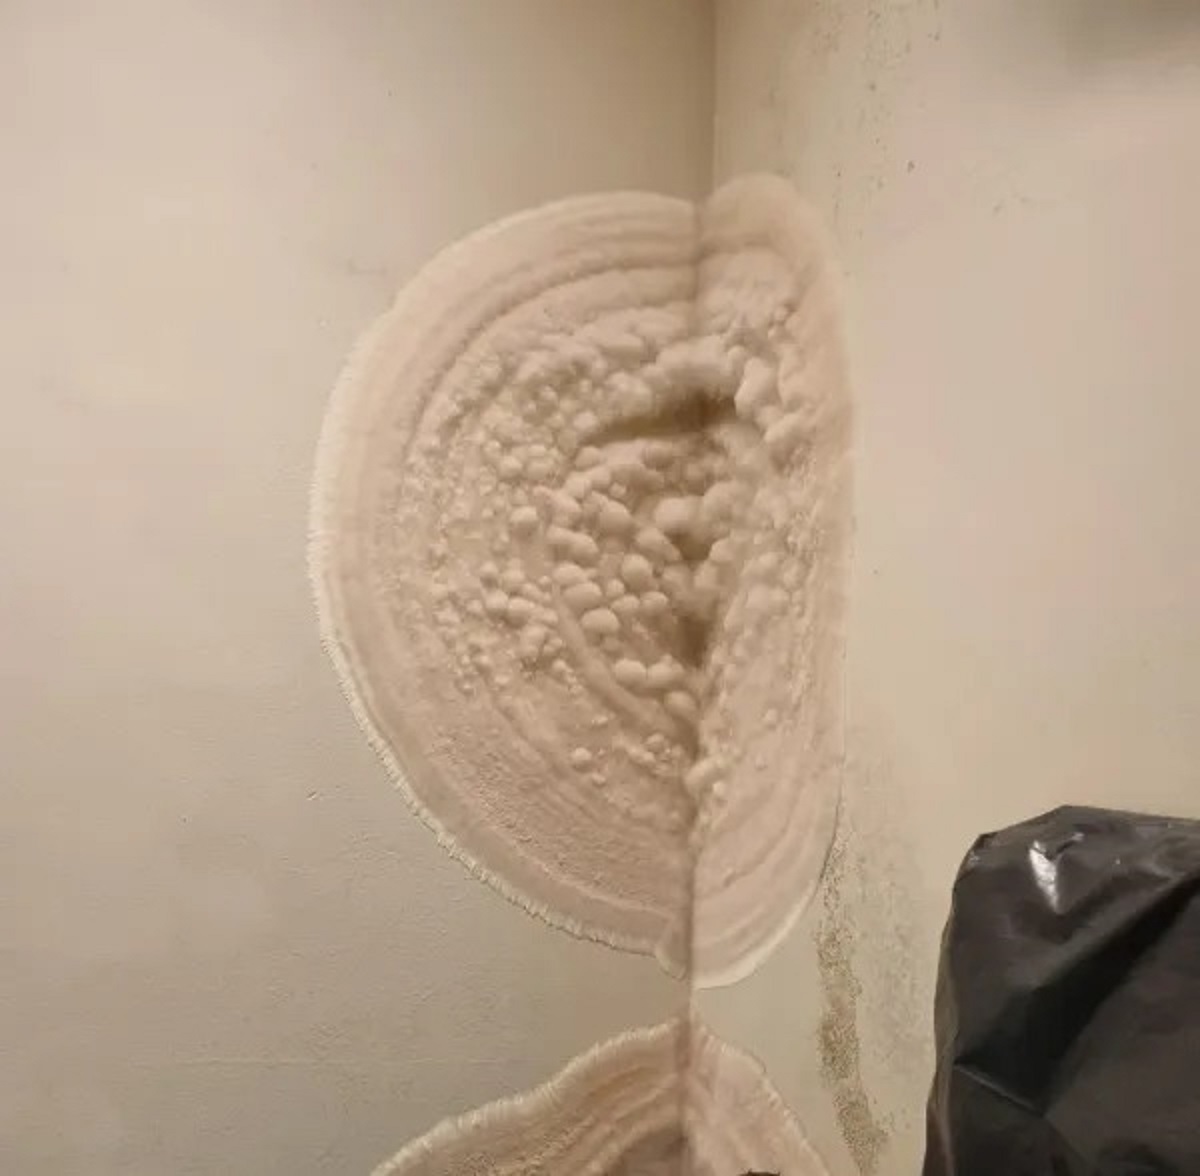 “Opened my unit to get my Christmas decorations only to find it covered in mold.”